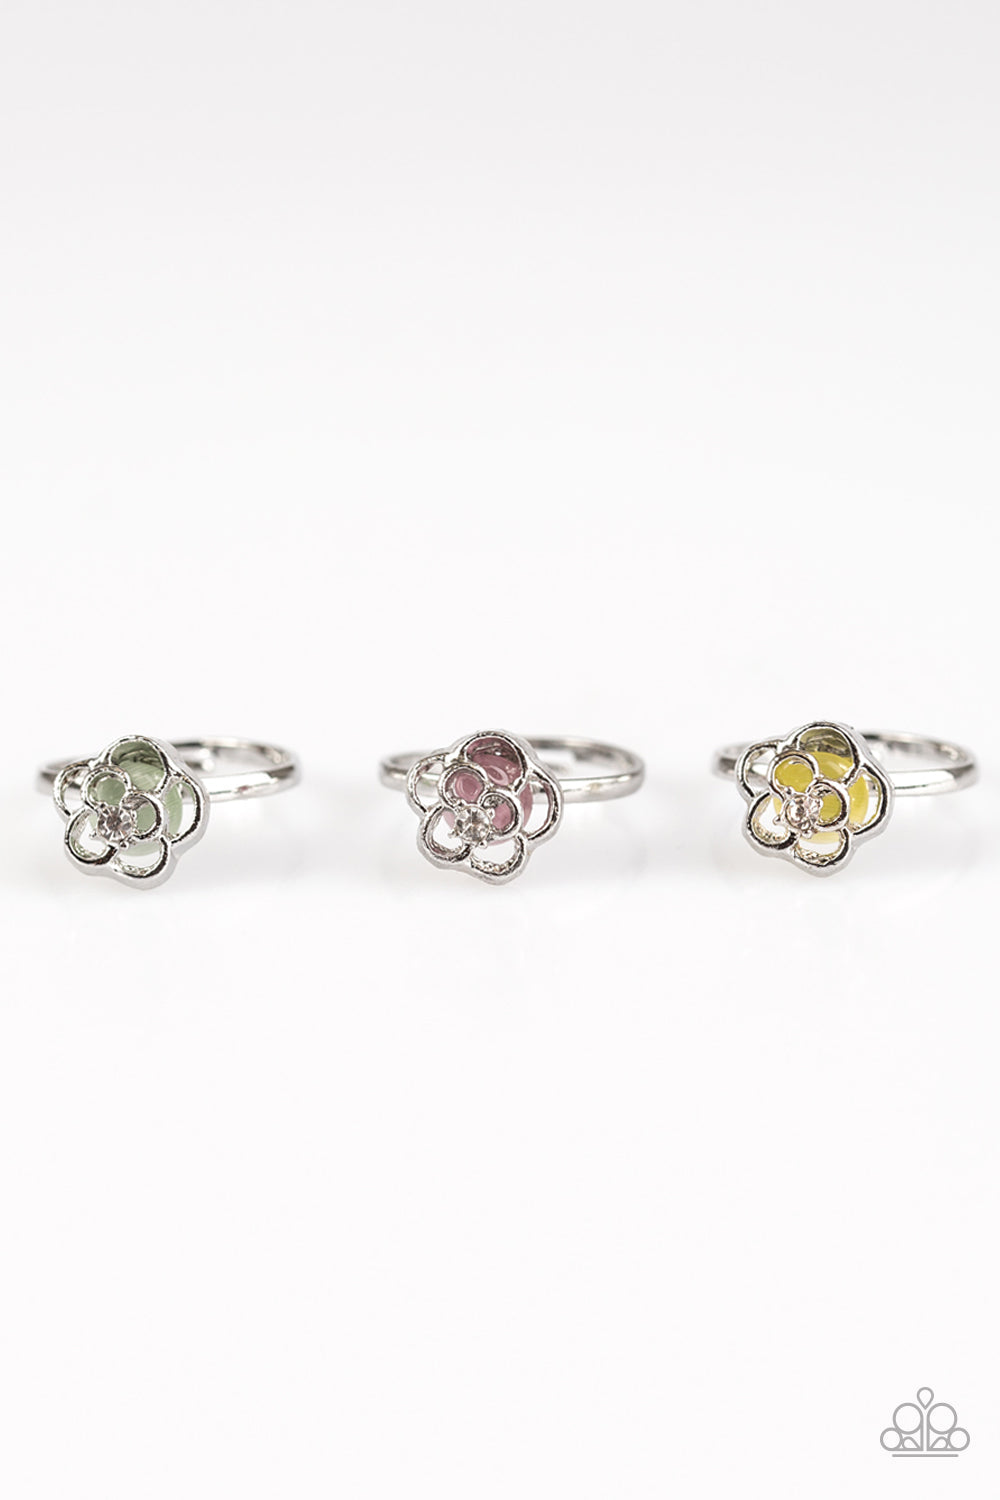 Paparazzi Starlet Shimmer Girls Rings  - 10 - Pastel Flowers - Vintage! - $5 Jewelry With Ashley Swint